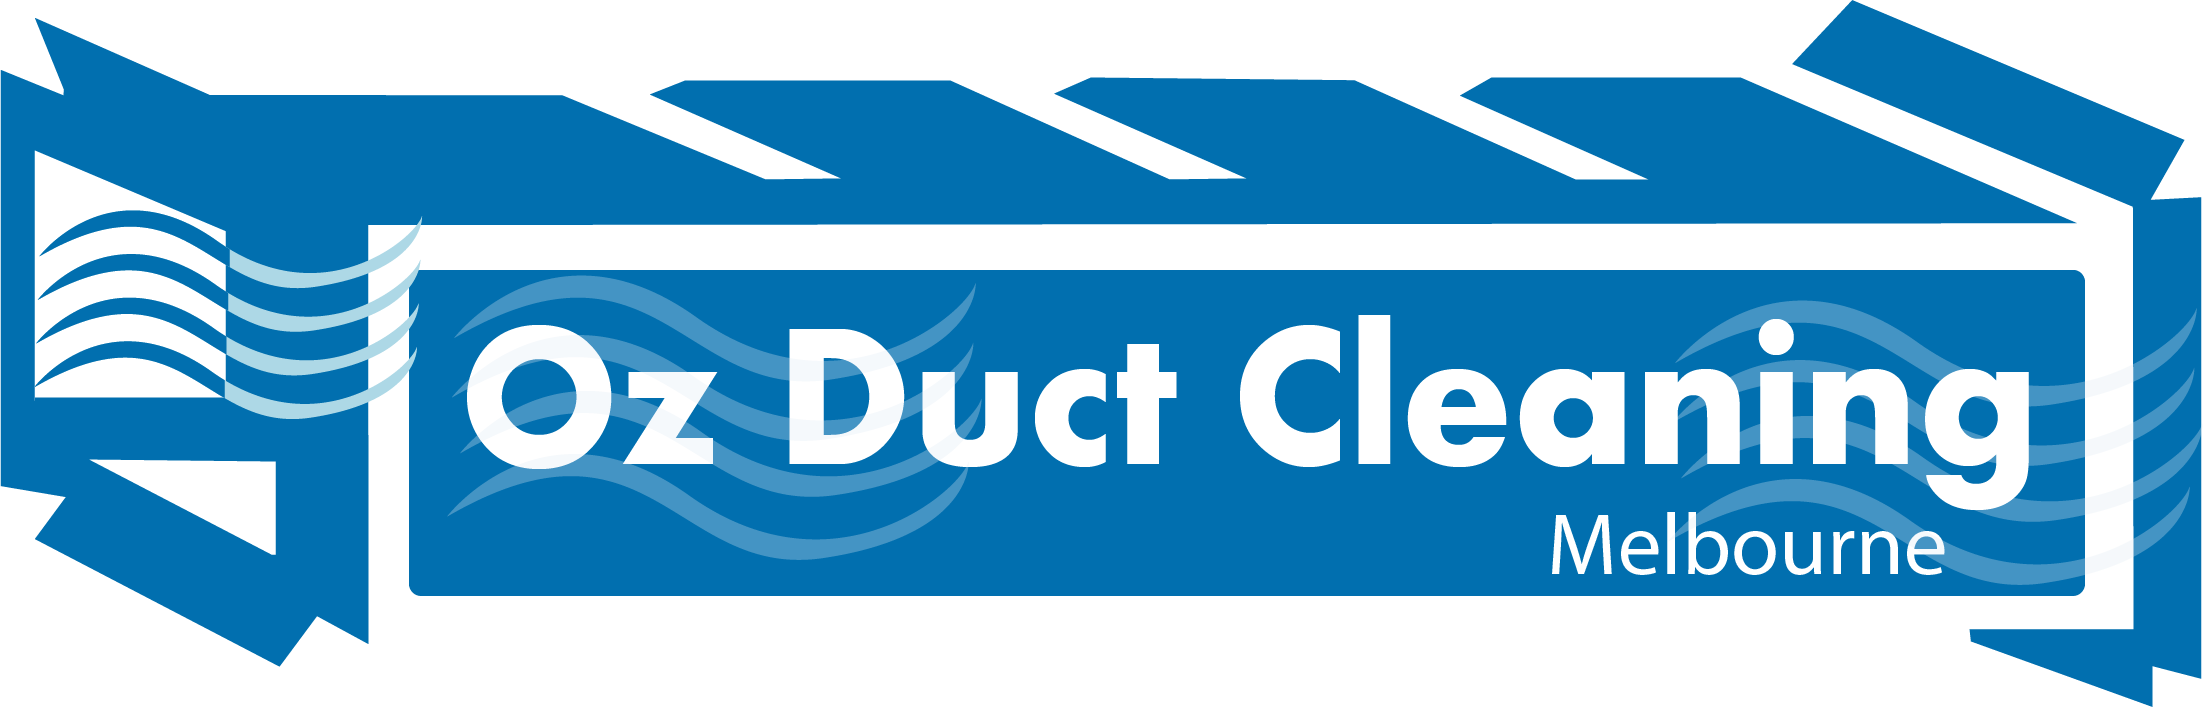 Duct Cleaning Melbourne - Duct (2203x707)